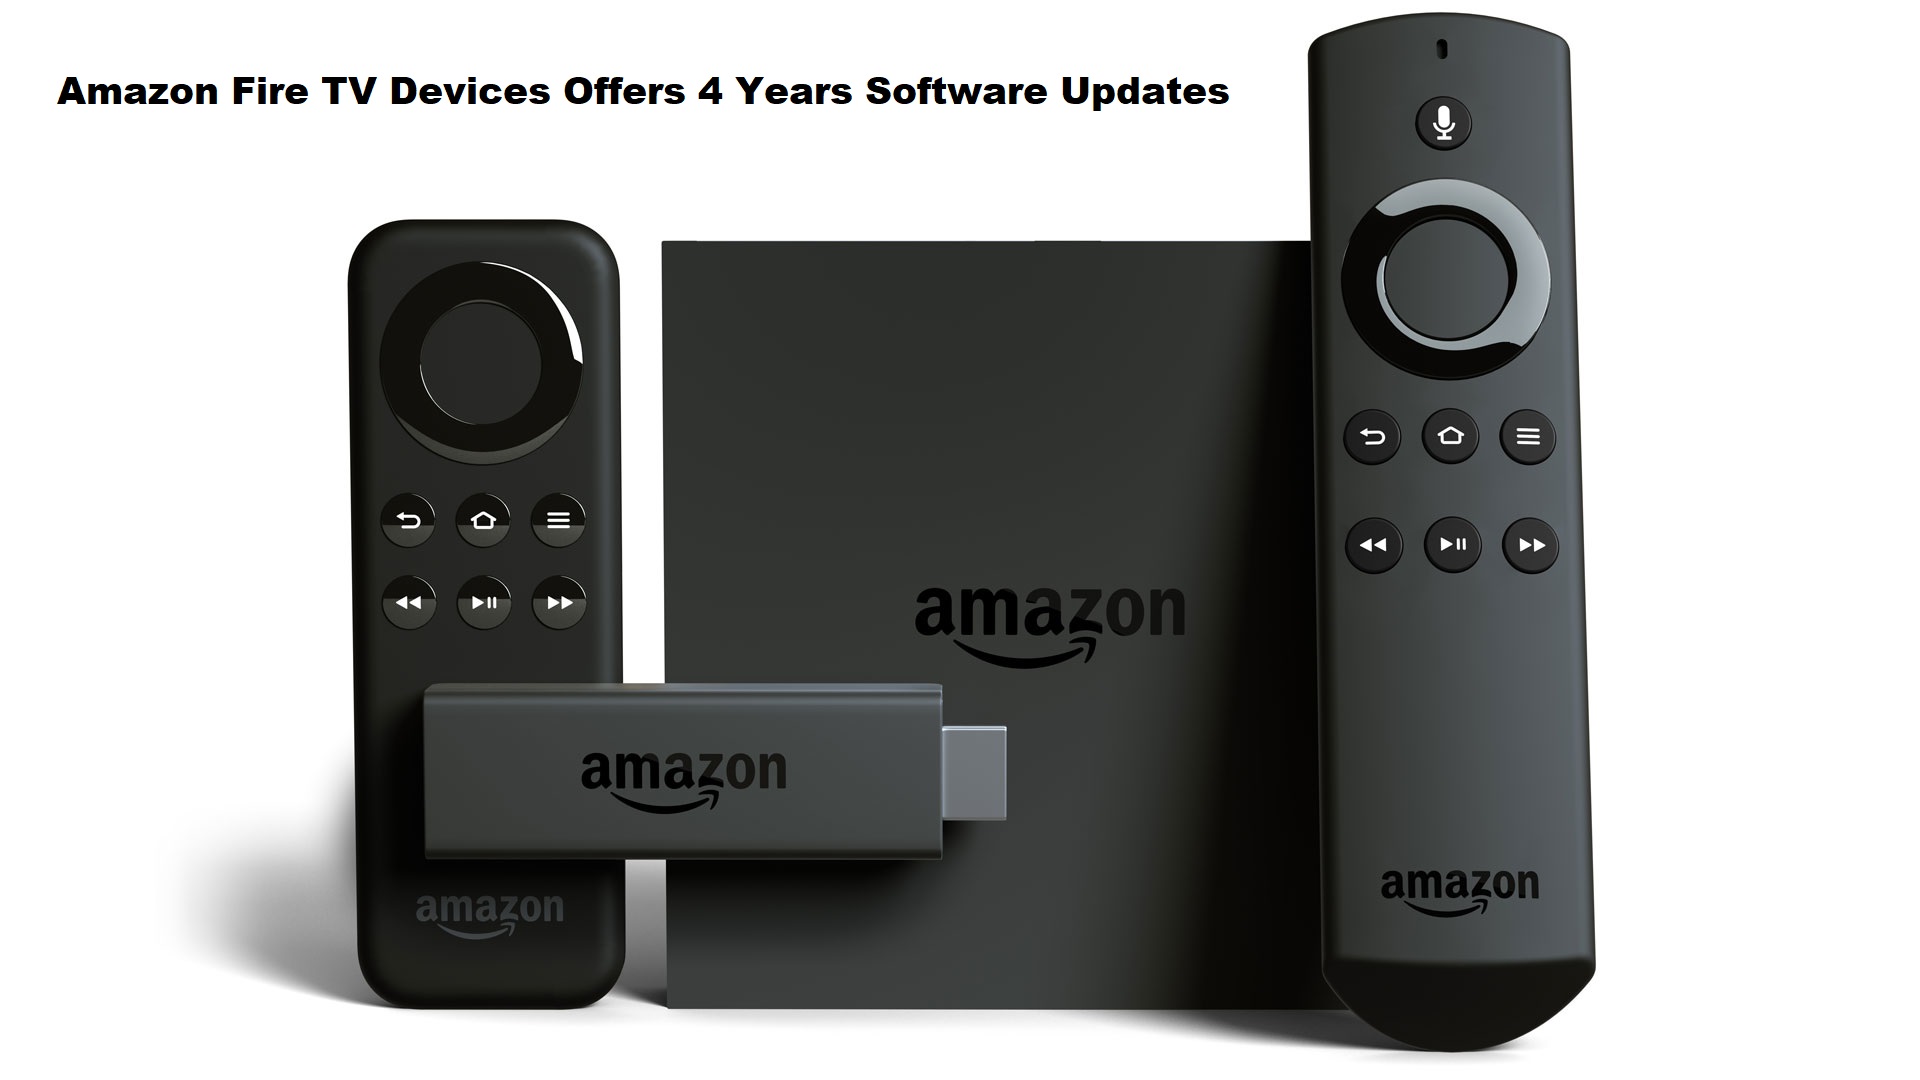 Amazon Fire TV Devices Offers 4 Years Software Updates